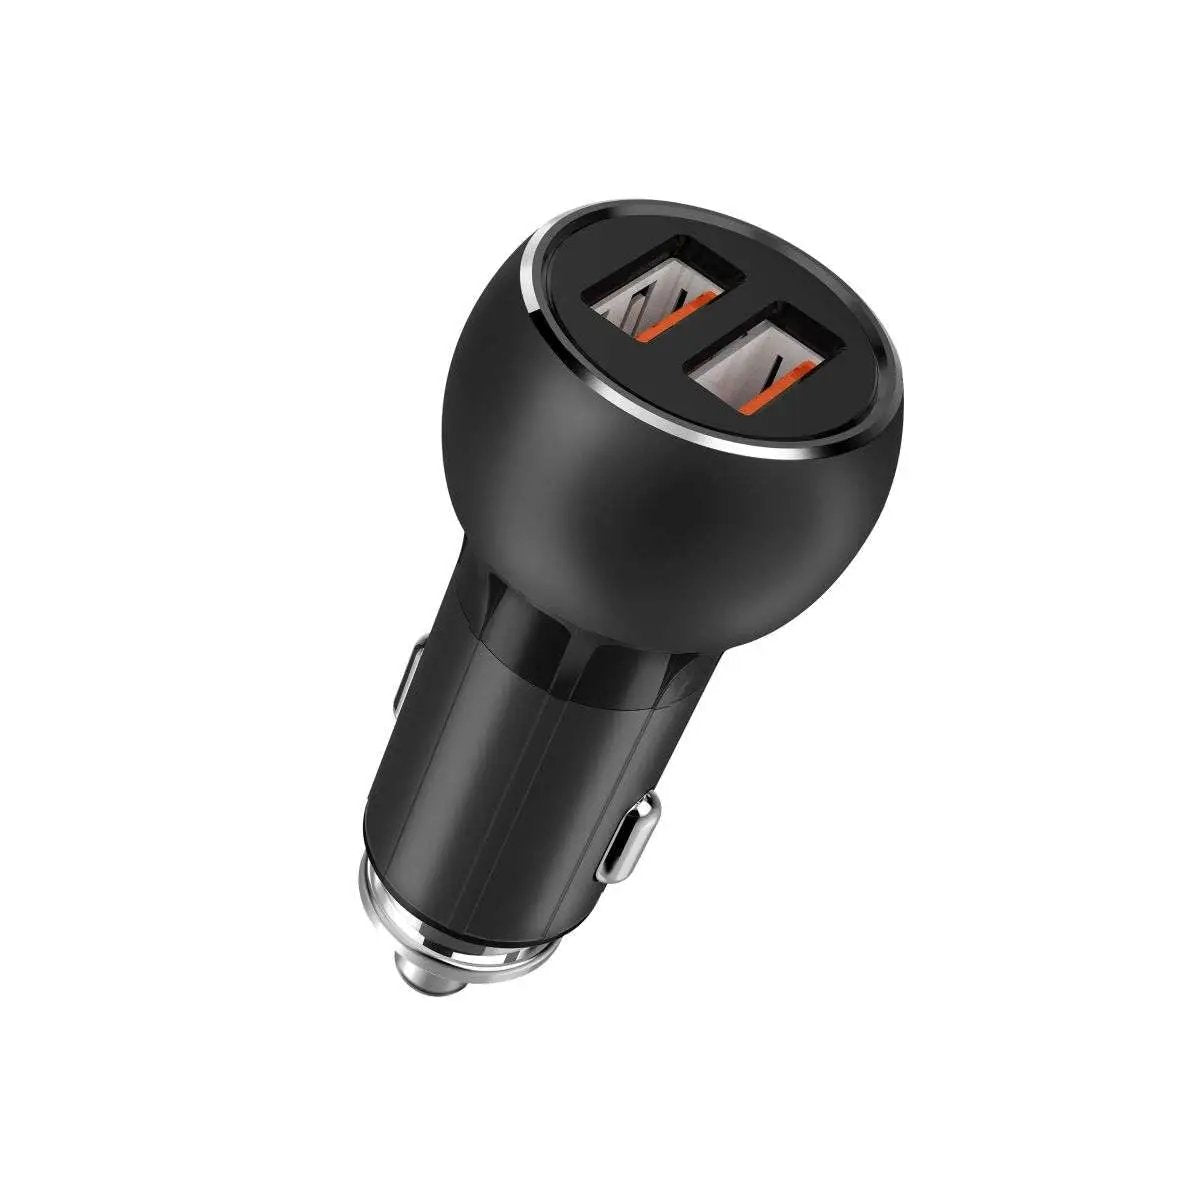 LDNIO C503Q Metal Car Charger Qualcomm Quick Charge 3.0 with Cable - Hugmie